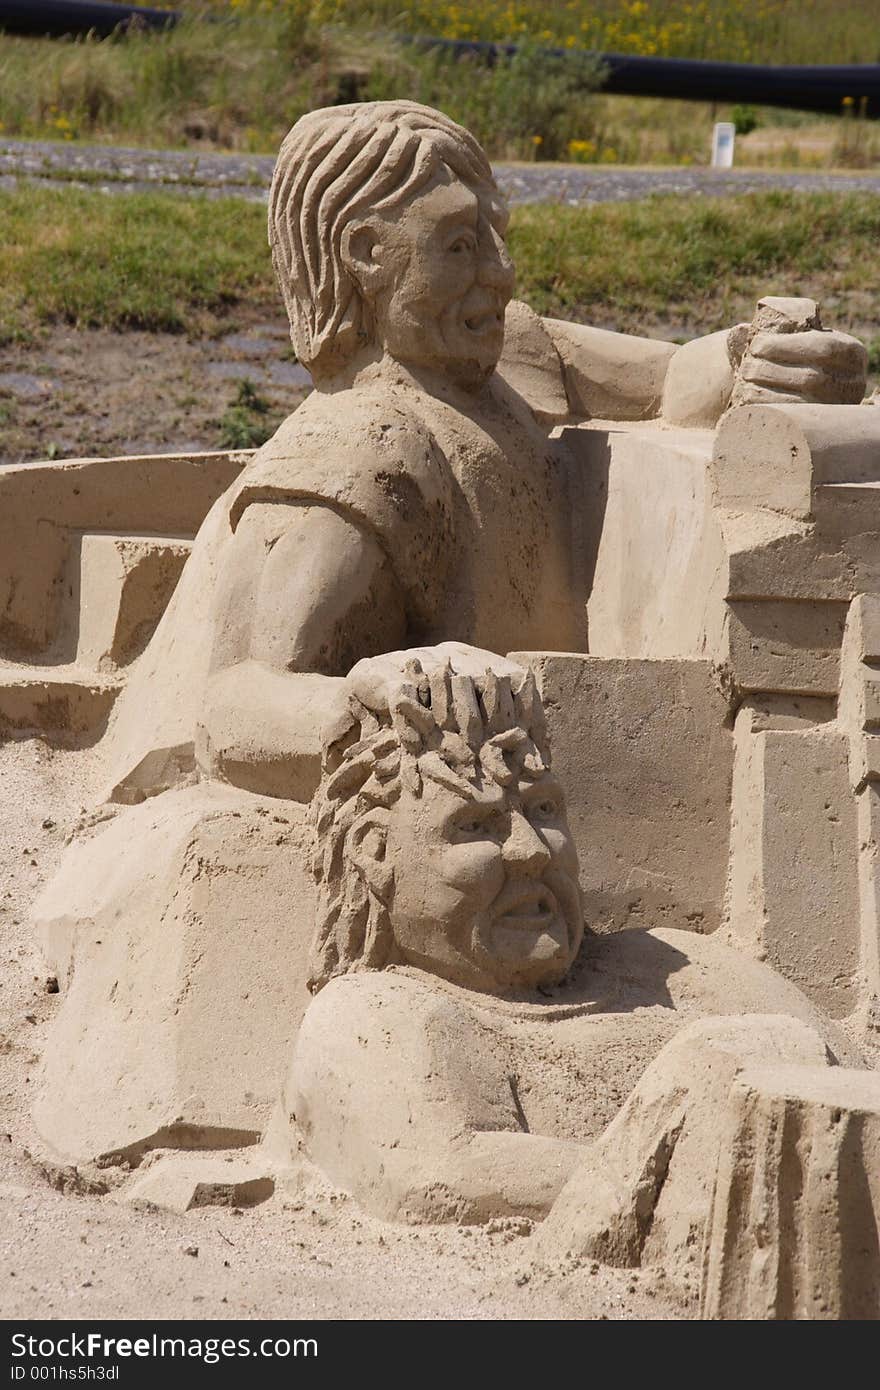 Two figures made out of sand. Two figures made out of sand